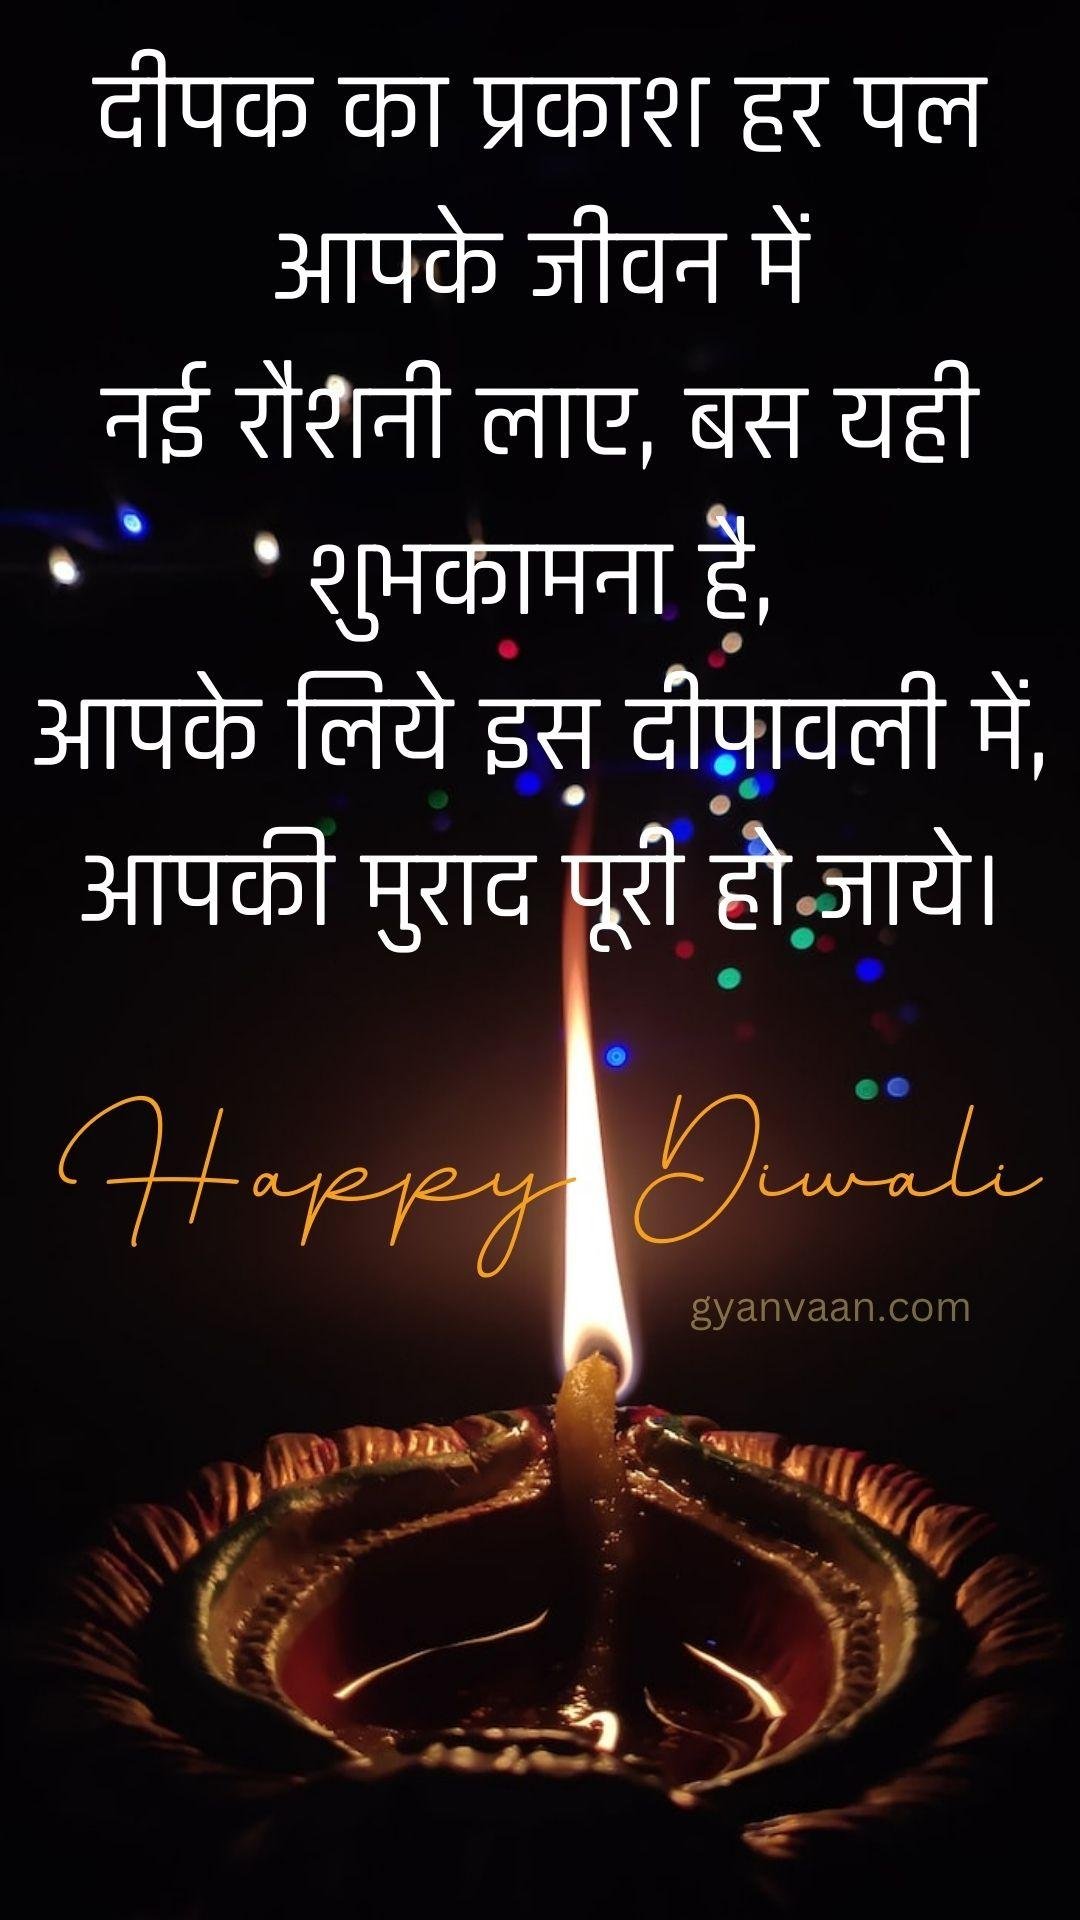 Diwali Quotes In Hindi With Wishes20 - Diwali Quotes In Hindi